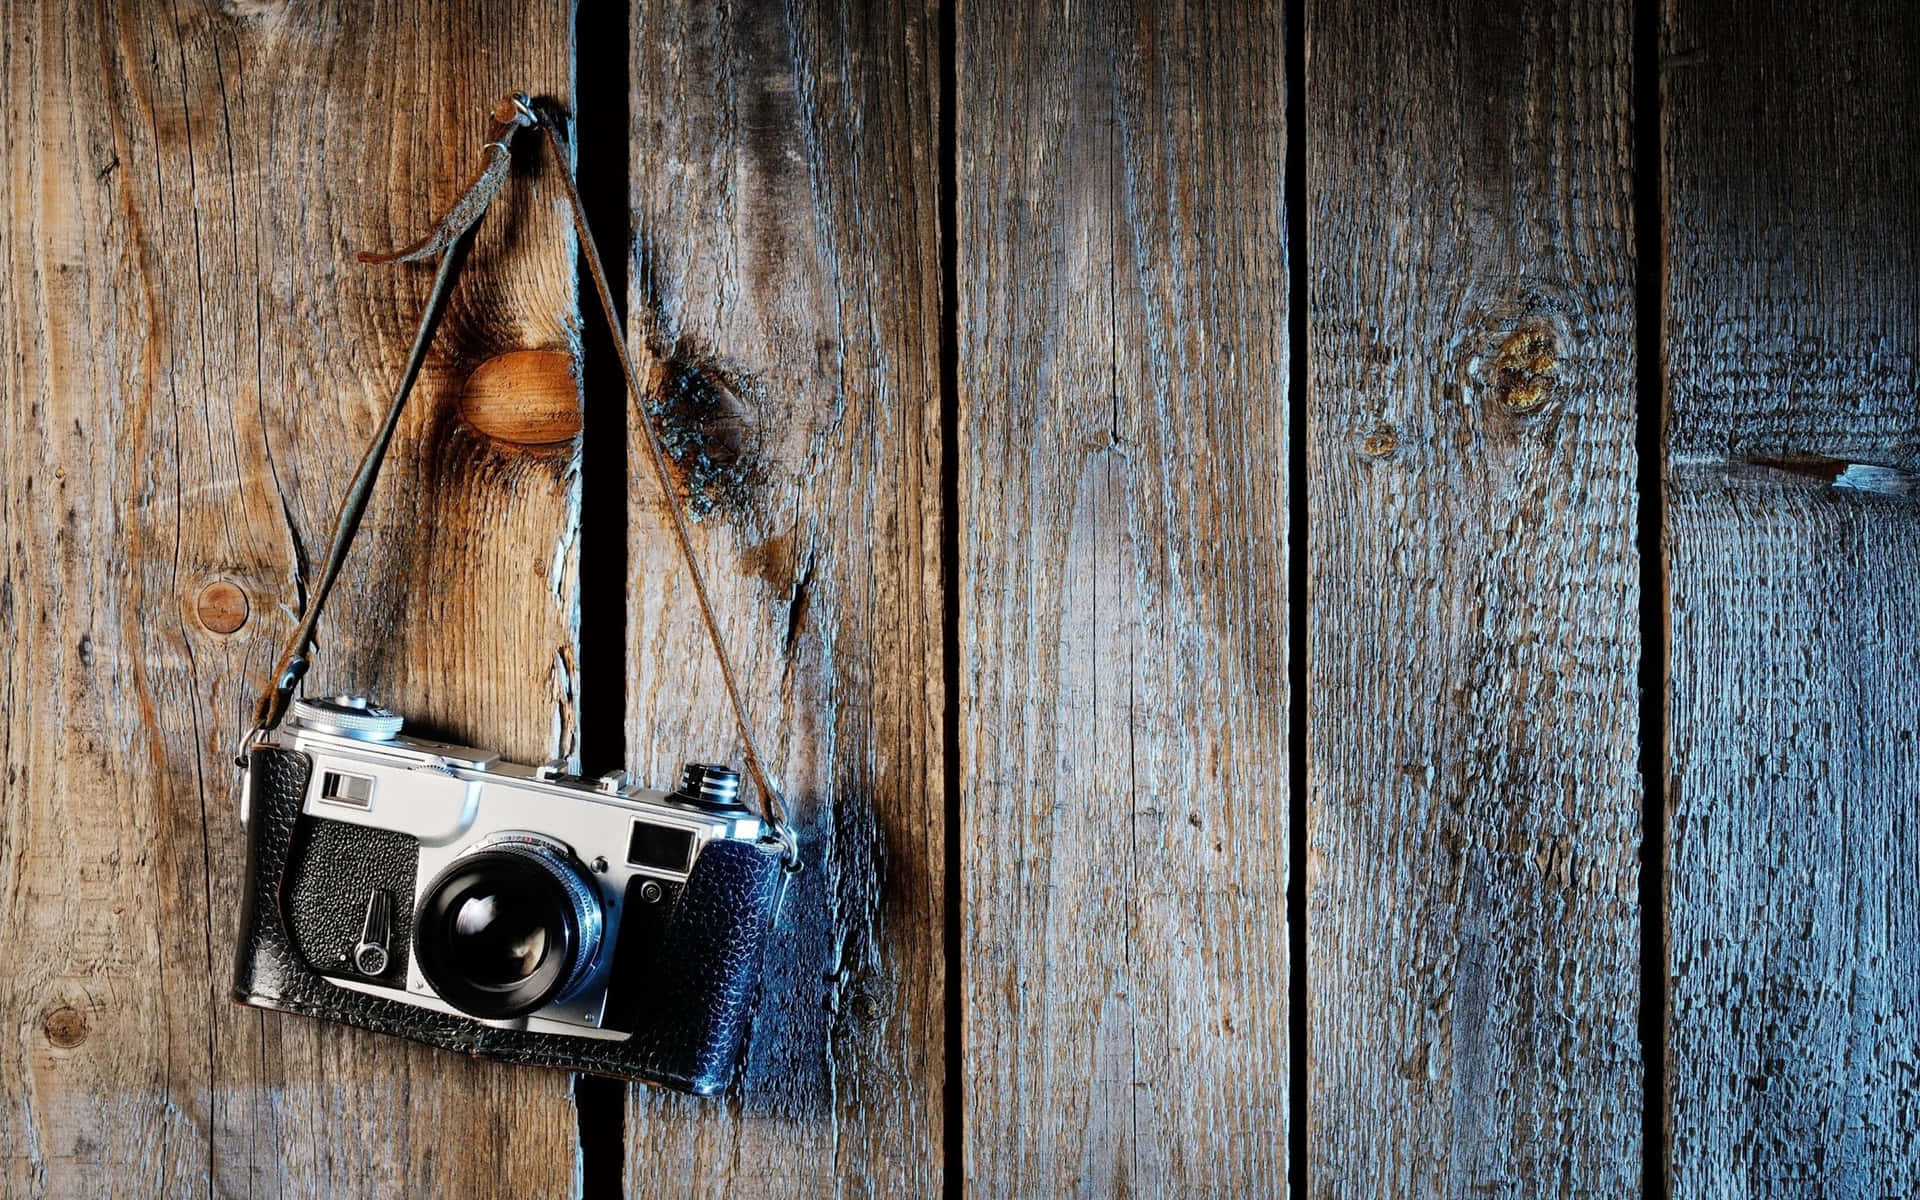 Caption: Vintage Camera Hanging From A Wooden Beam